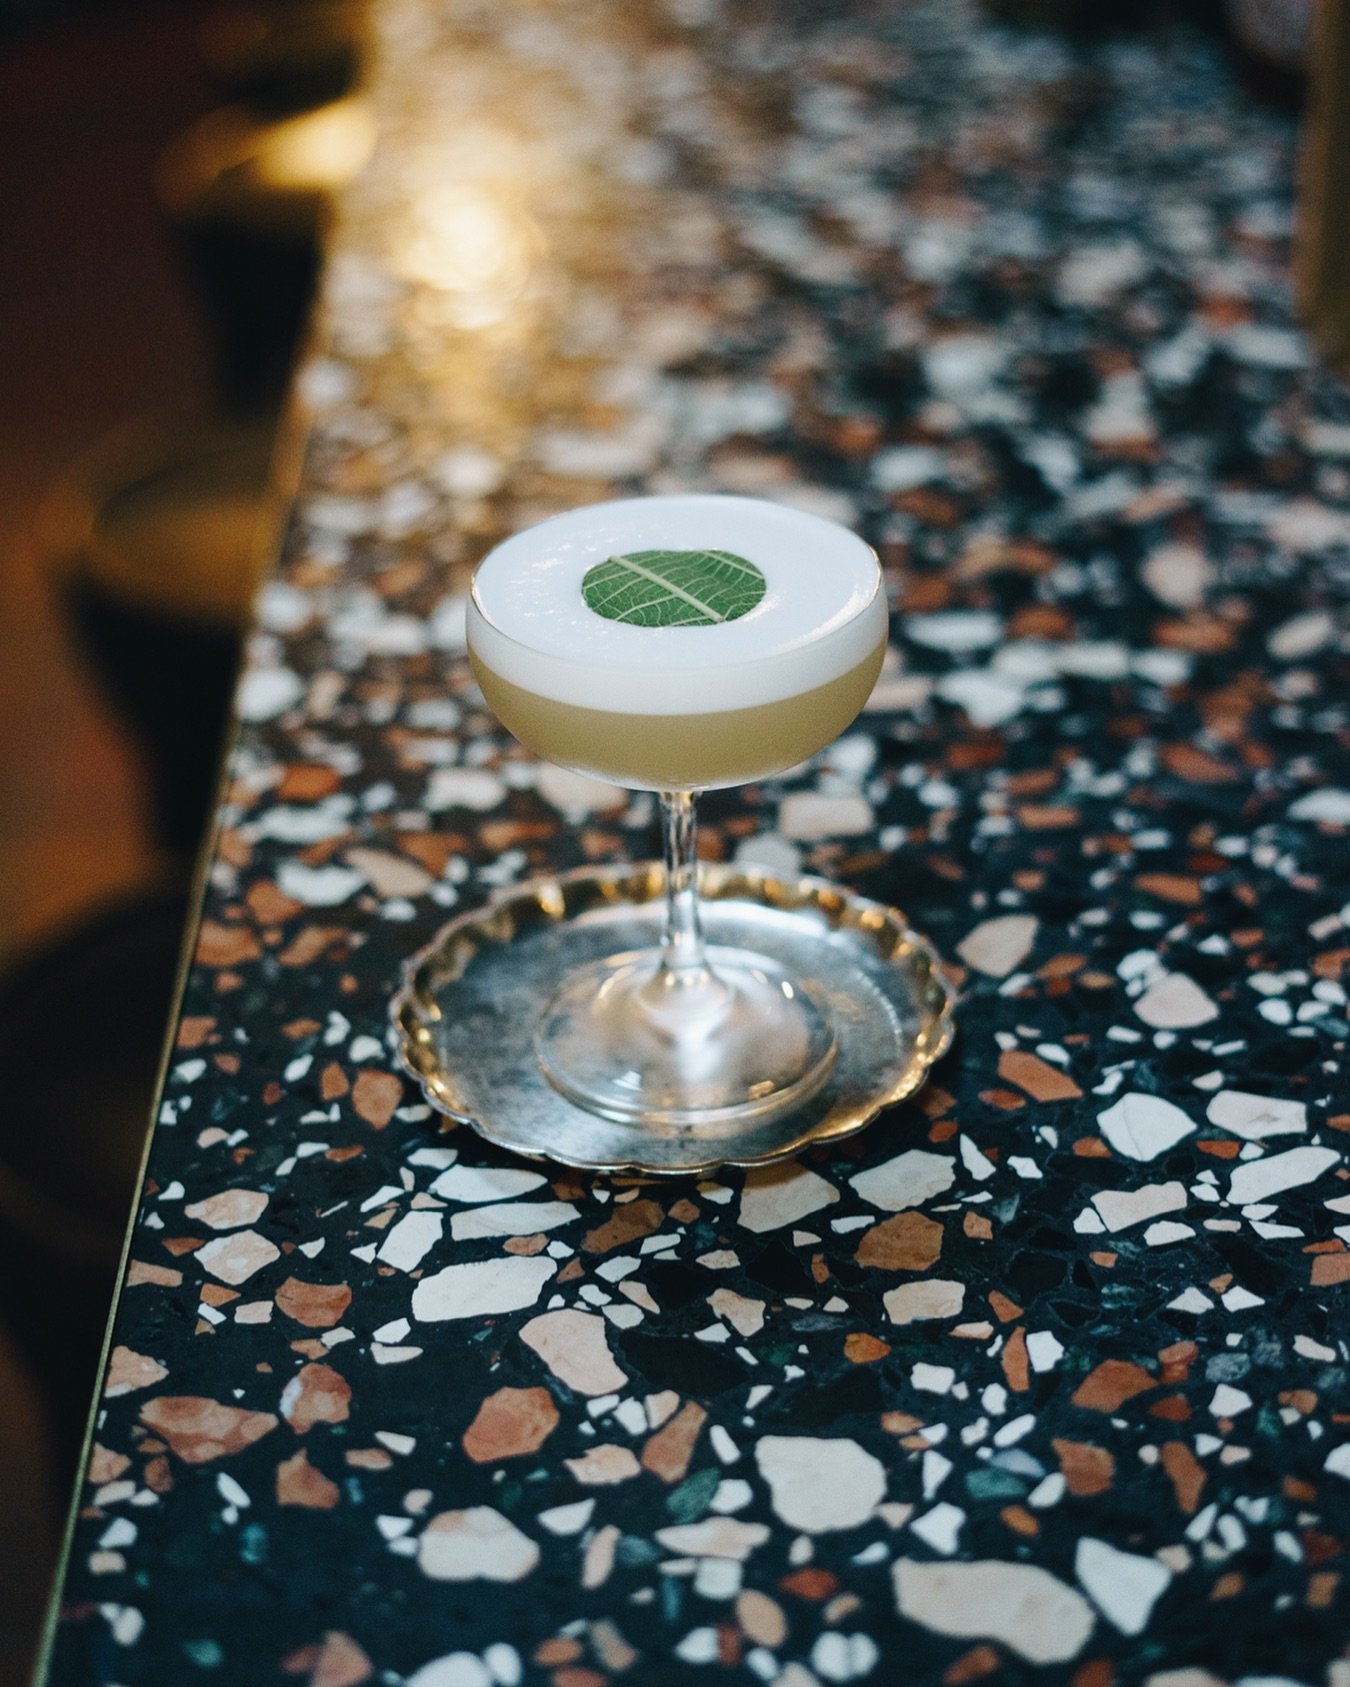 An emerging fan favourite from our new cocktail list! 
𝙁𝙄𝙂 𝙋𝙃𝘼𝙎𝙀 - coconut infused vodka, fig liqueur, orange &amp; cinnamon myrtle syrup, citrus, foam 🥥 🍊 

Bookings for the week ahead at our Cocktail Bar &amp; Bistro-theque can be made vi